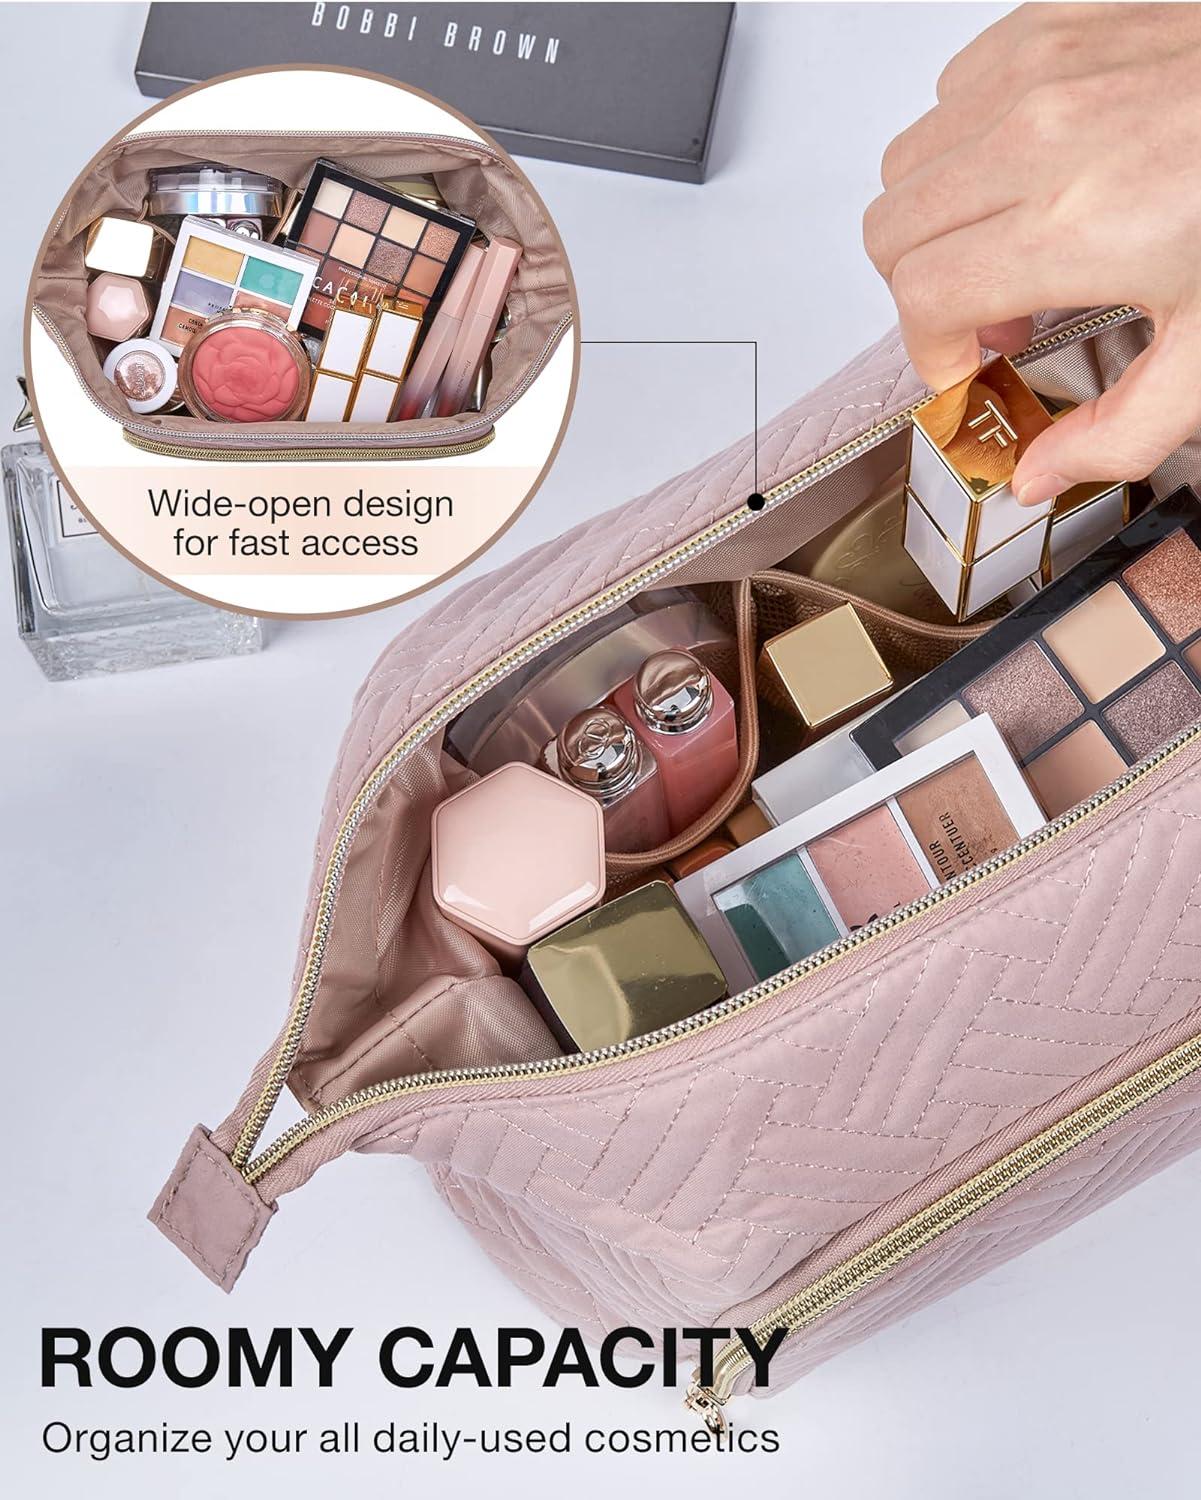 12 Best Small Makeup Bags for Your Purse | LoveToKnow